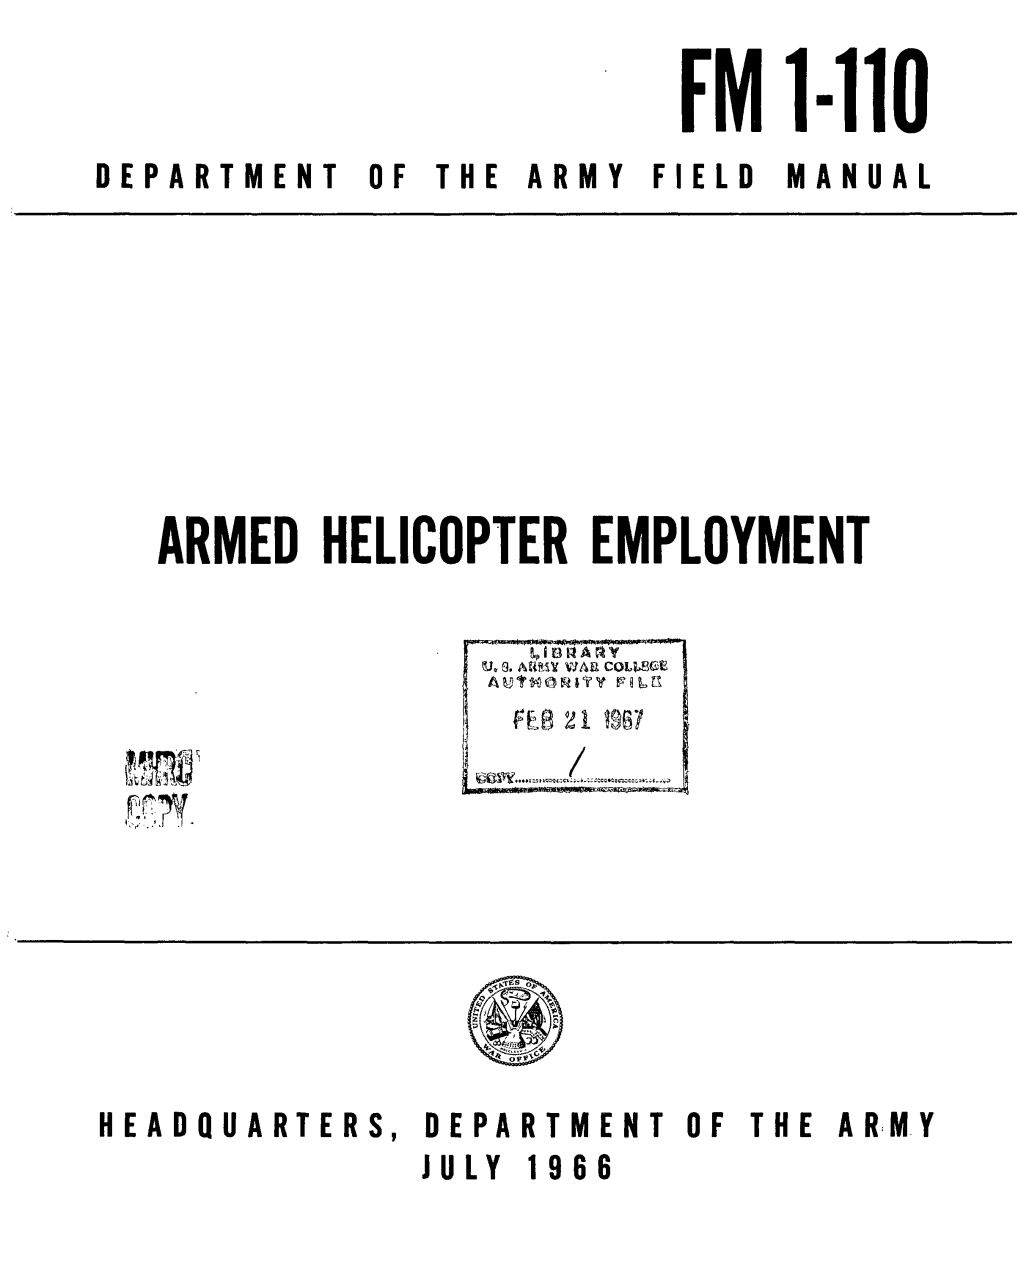 Armed Helicopter Employment